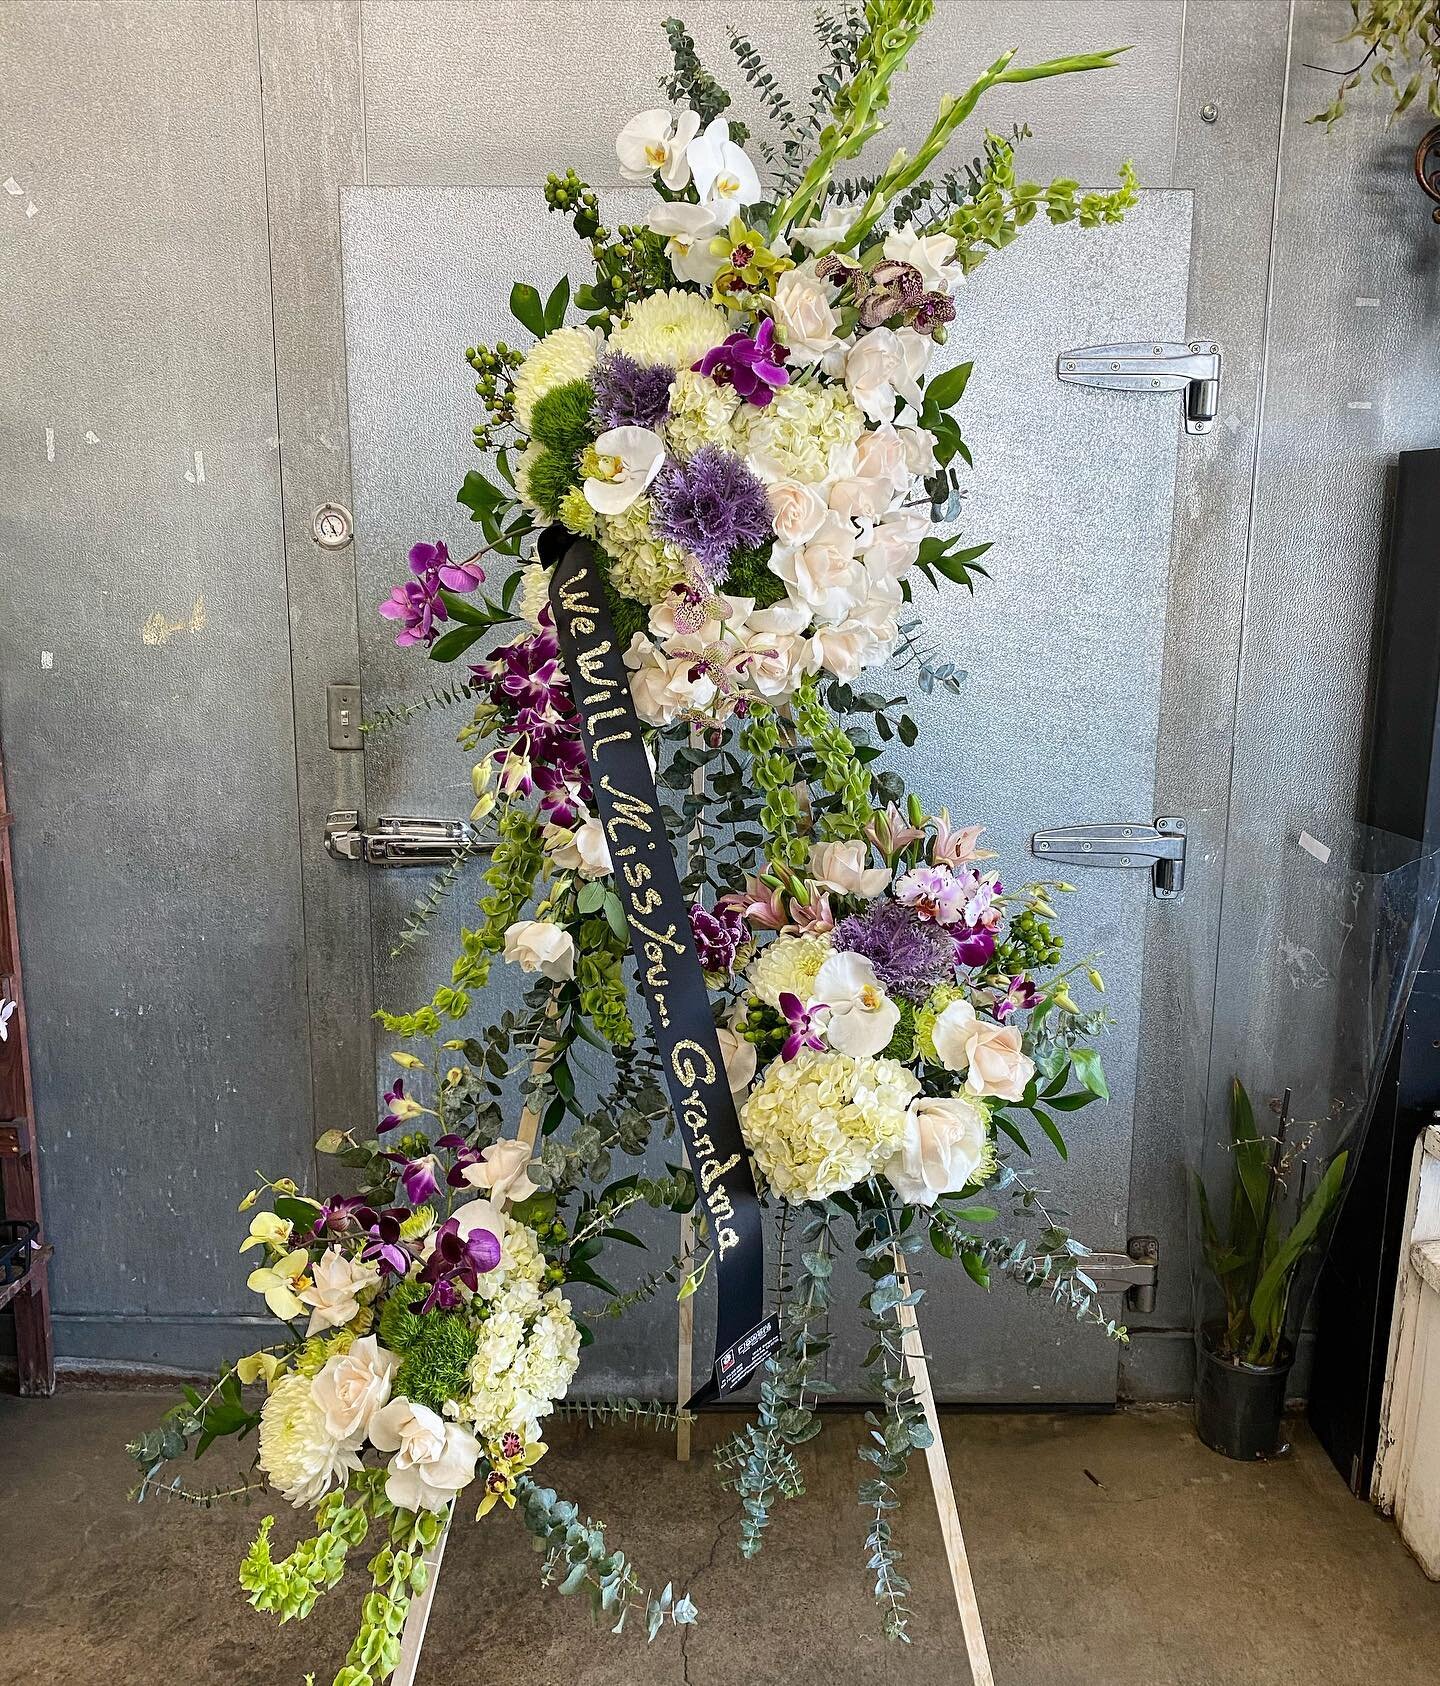 It&rsquo;s been a while since we displayed our standing arrangements! 

What do you think about this beauty?

&bull;
&bull;
&bull;

#flowerarrangements #floralinspiration #flowercenter #laflorist #funeralarrangements #funeralflowers #funeralflorist 
